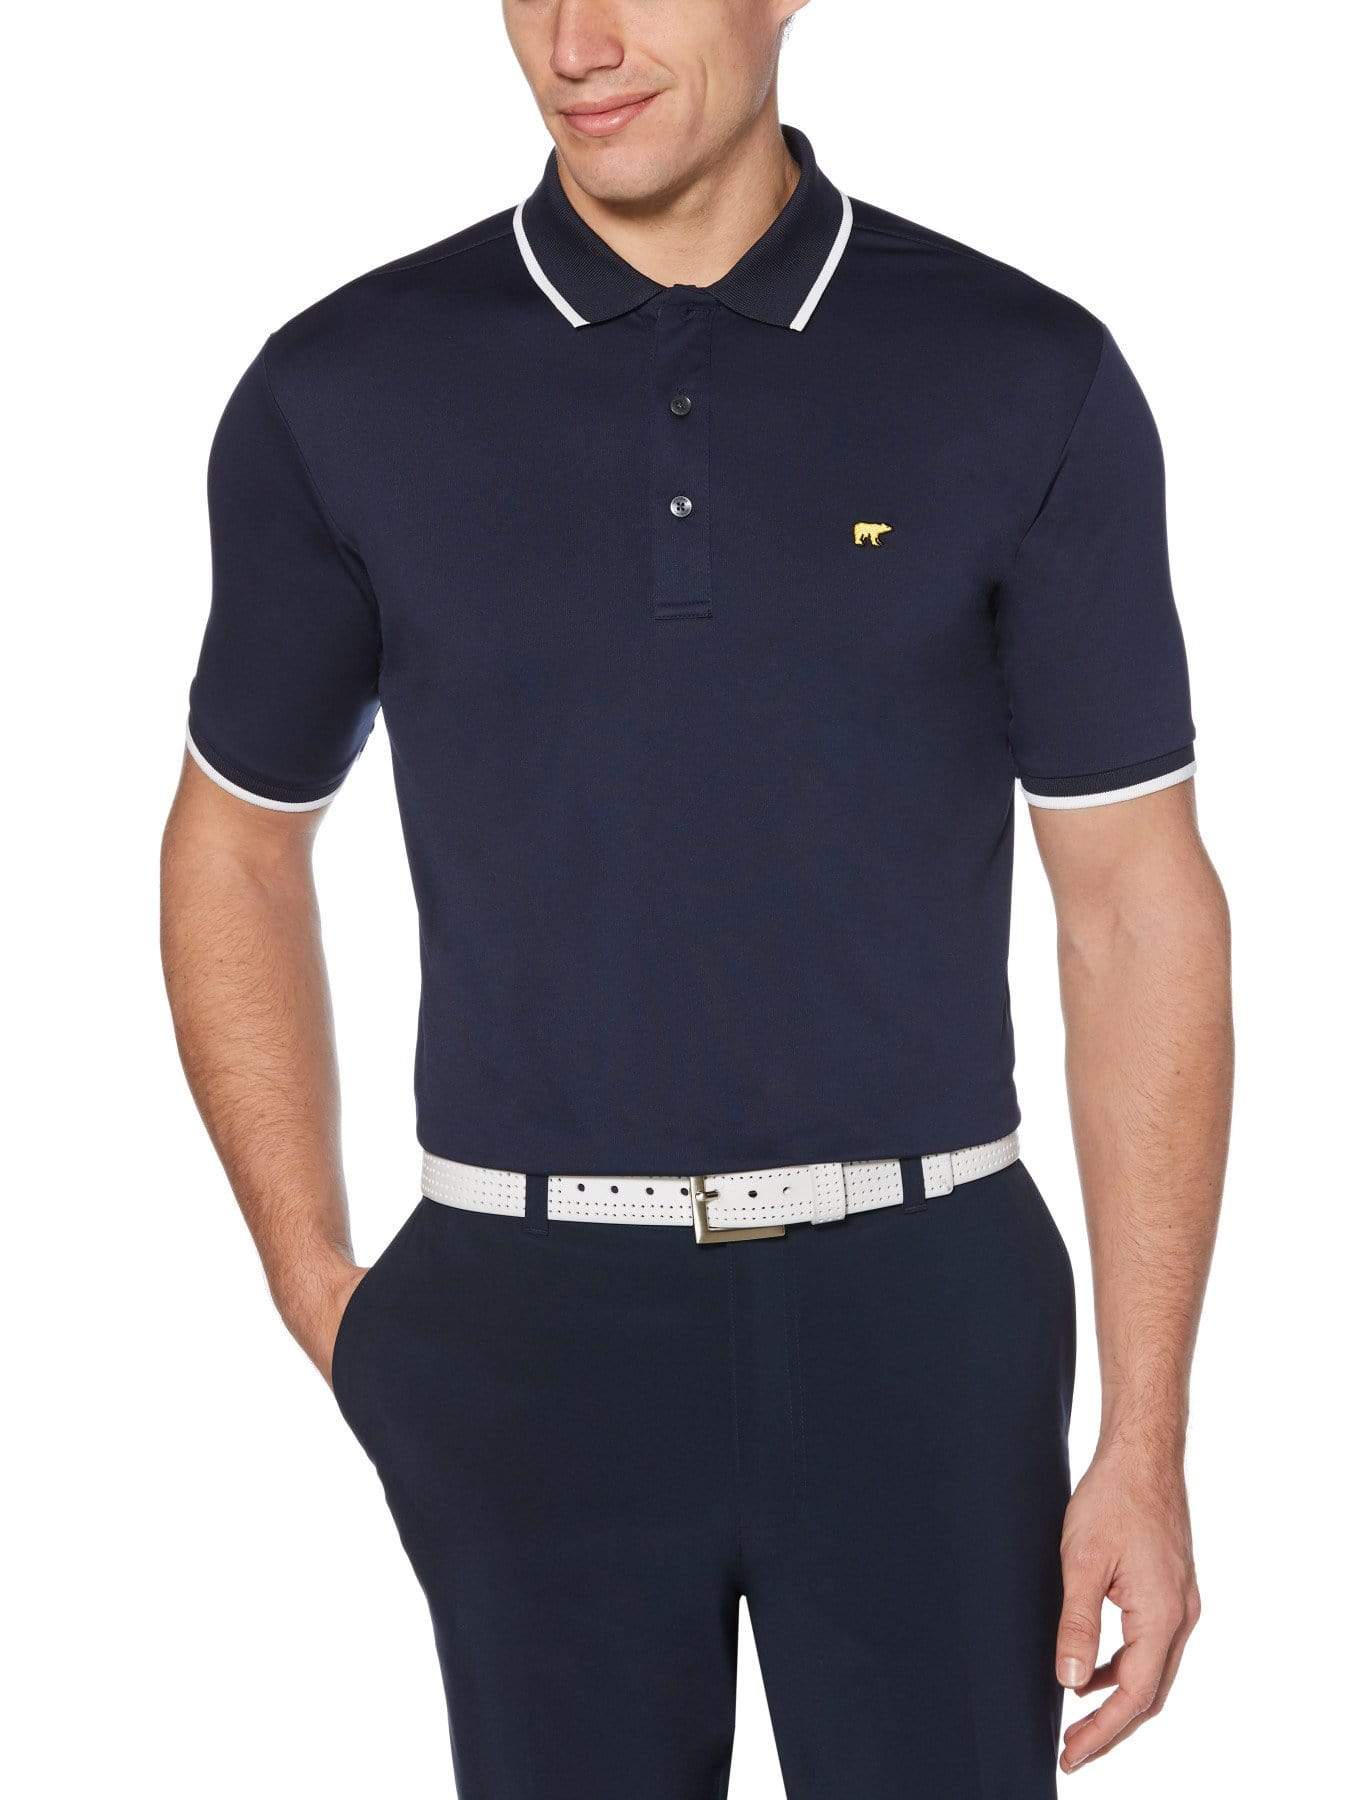 Jack Nicklaus Mens Solid Golf Polo Shirt w/ Cuff Tipping, Size Large, Classic Navy Blue, 100% Polyester | Golf Apparel Shop